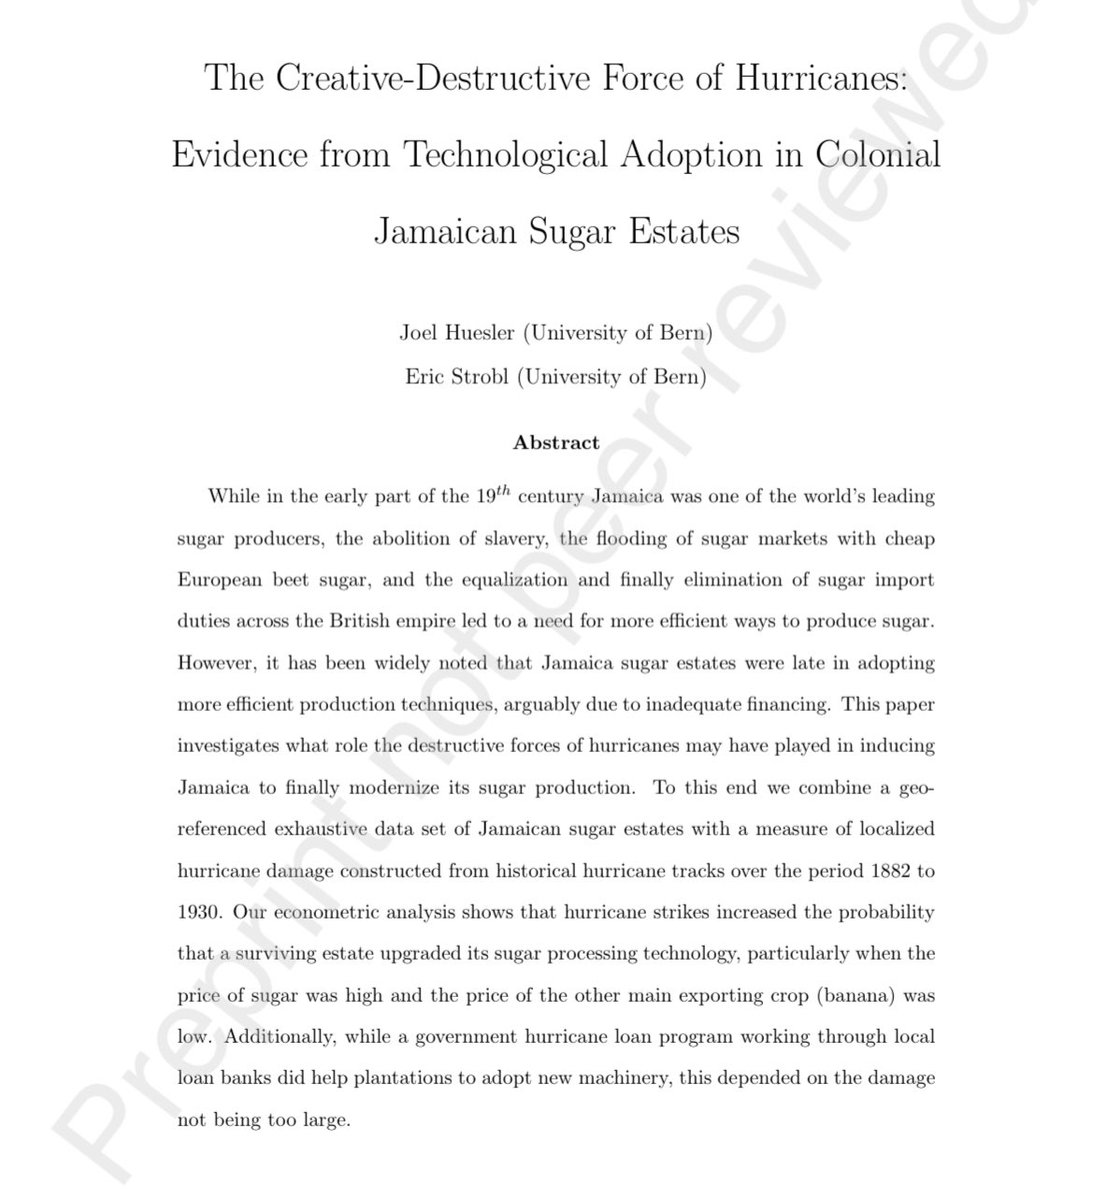 My paper on hurricanes & the Caribbean sugar industry didn't find its 1st journal home, but I see it as a chance to grow. With 2 years in, I'm more motivated to refine. Feedback is golden! Check out my findings: papers.ssrn.com/sol3/papers.cf…

#AcademicResilience 
 #ClimateImpact 🌪